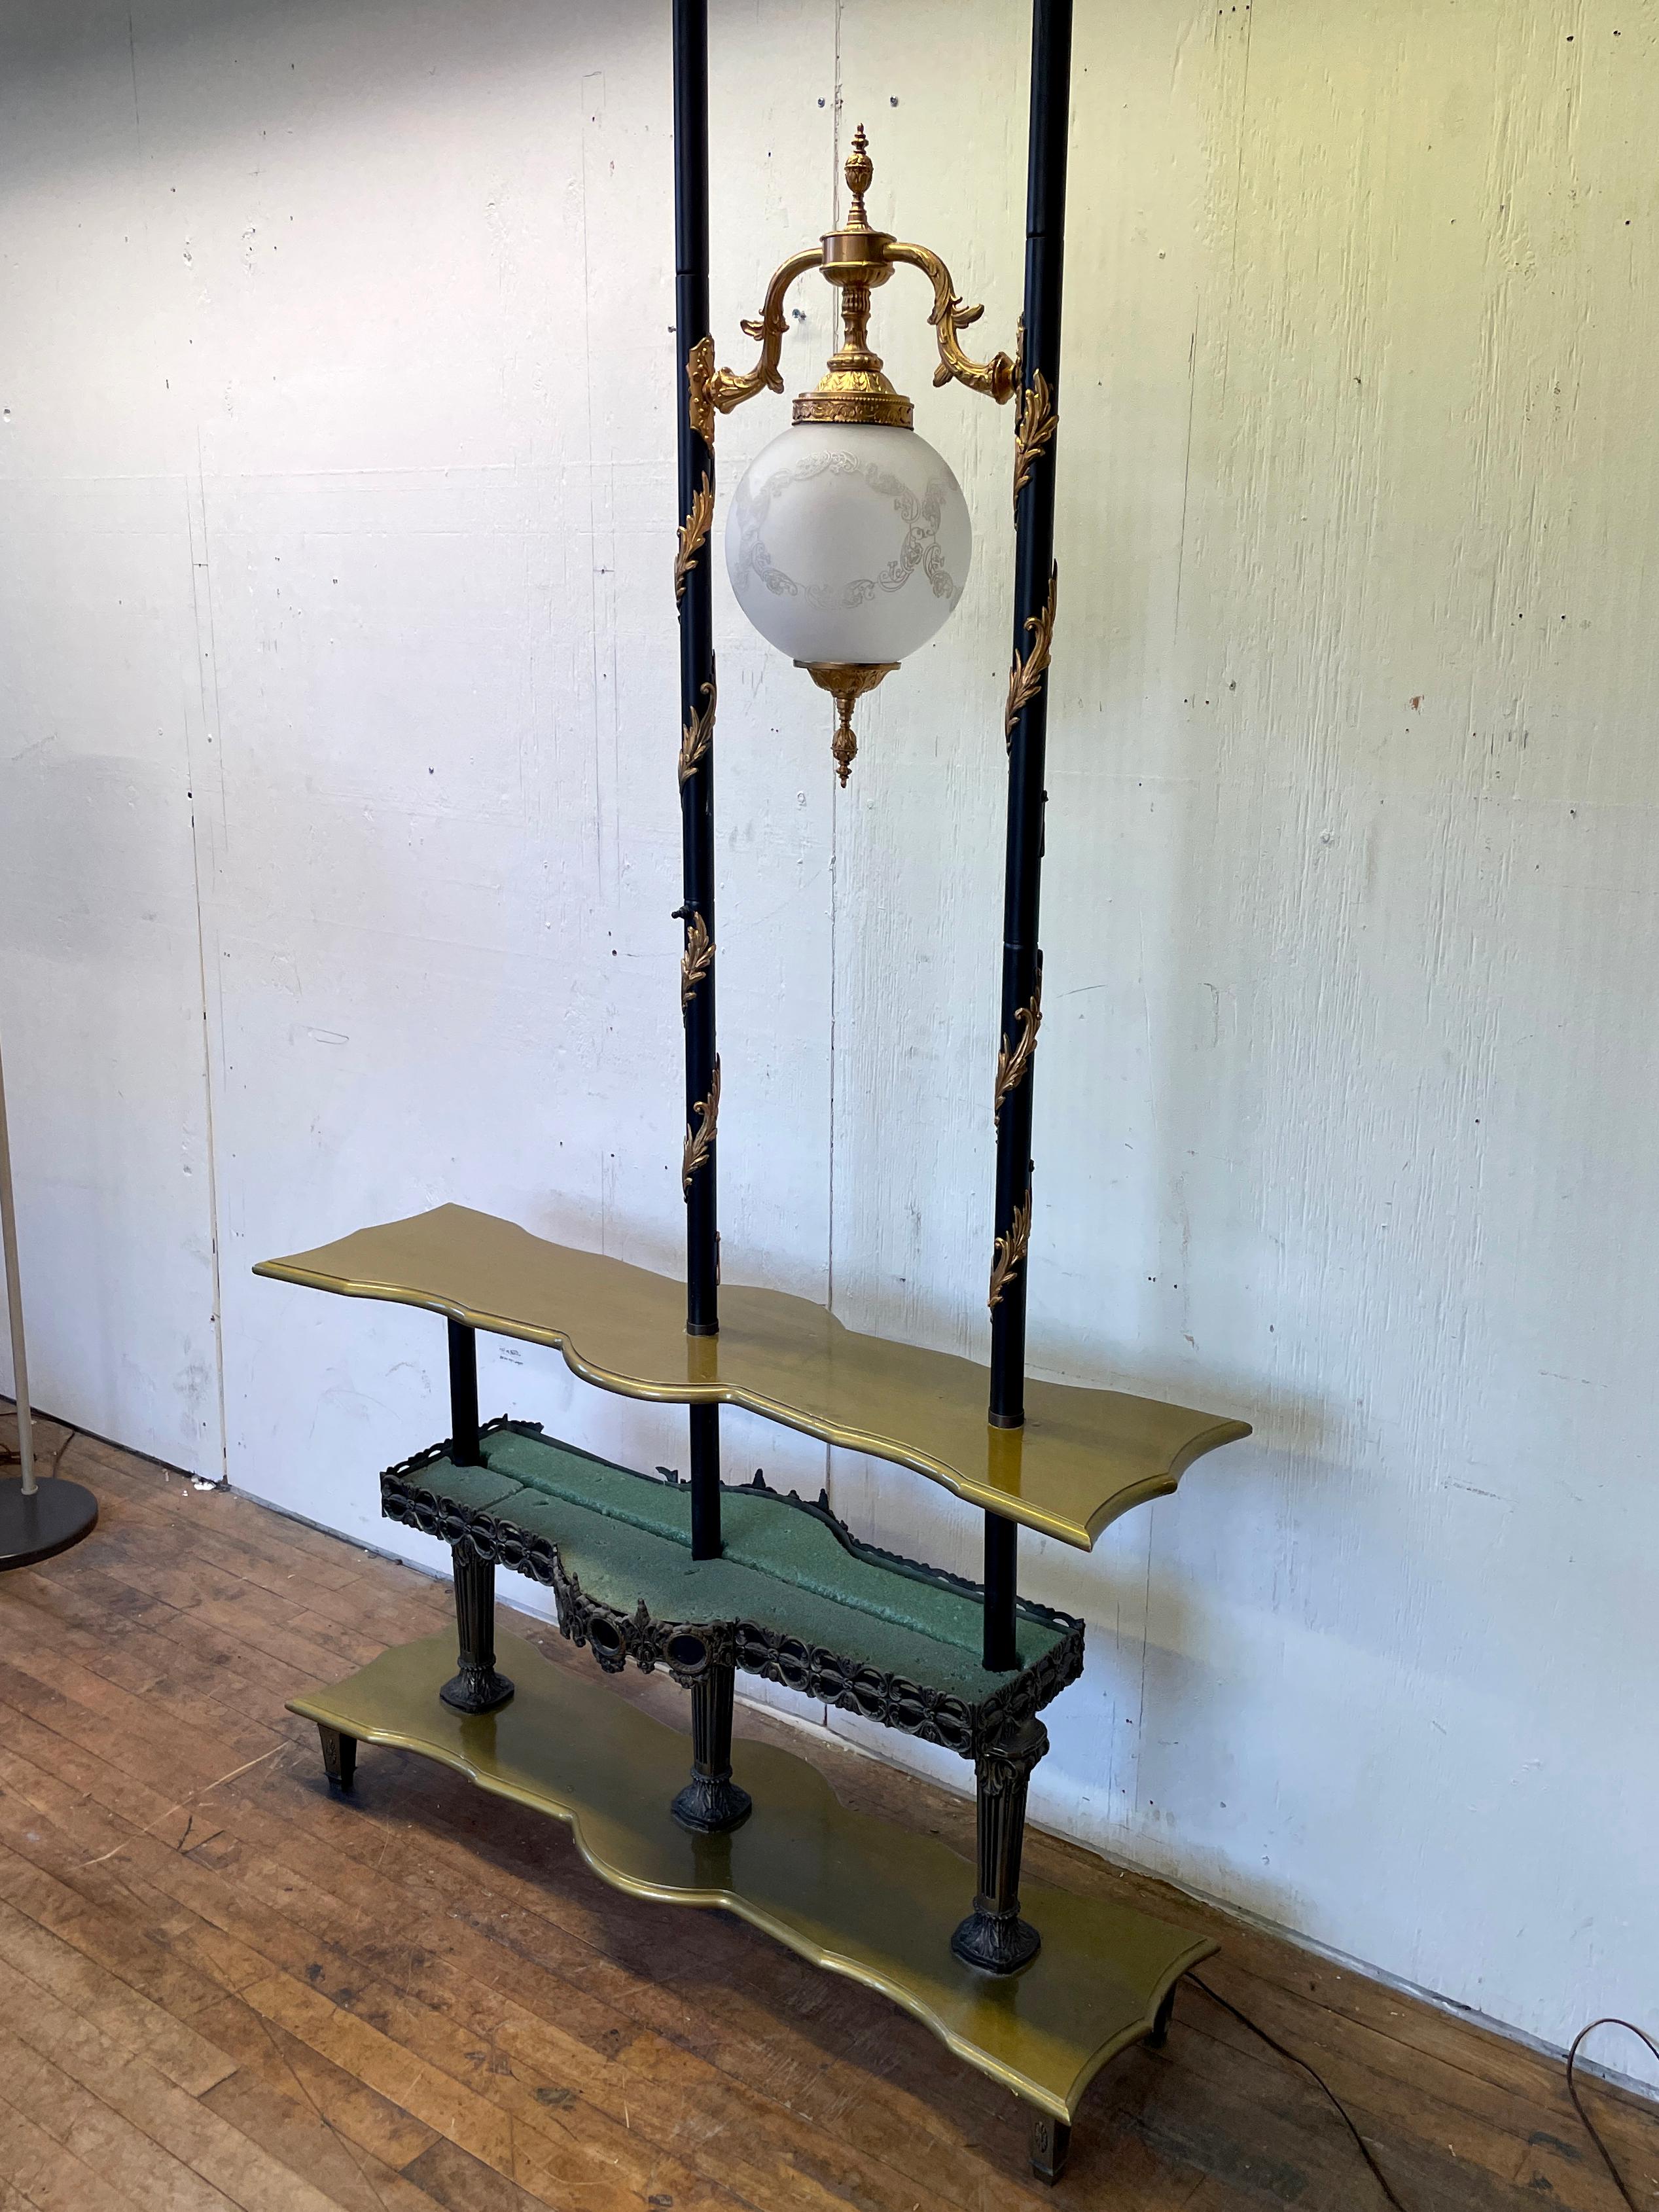 Hollywood Regency 1950s Midcentury Tension Pole Entryway Table with Lamp